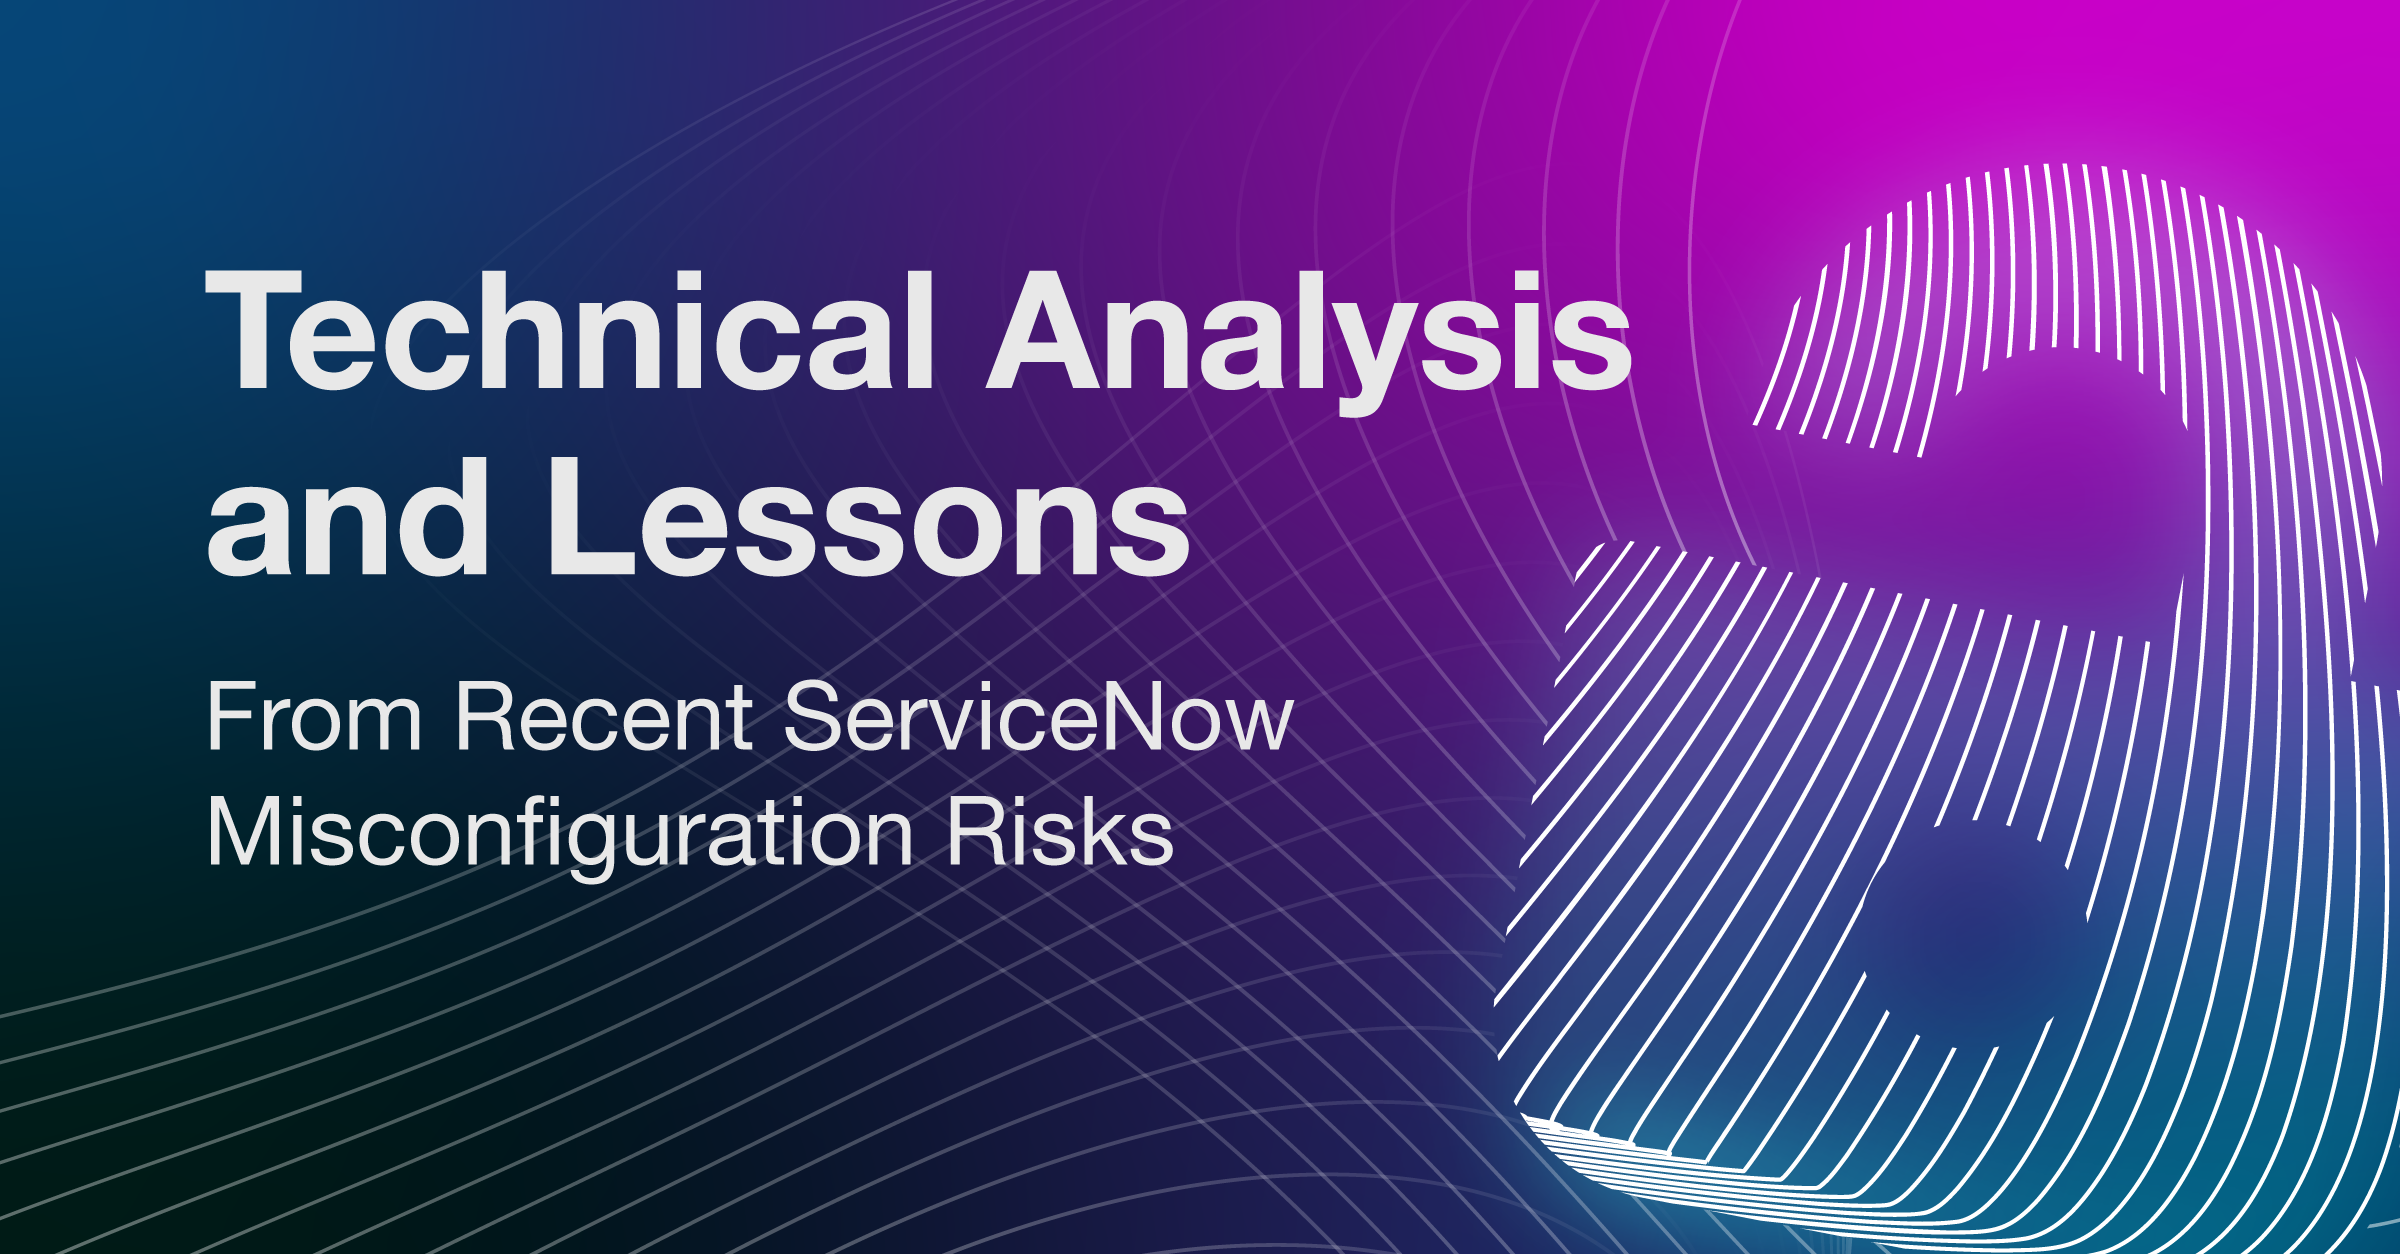 A Technical Analysis and Lessons From The Recent Service Now Misconfiguration Risks